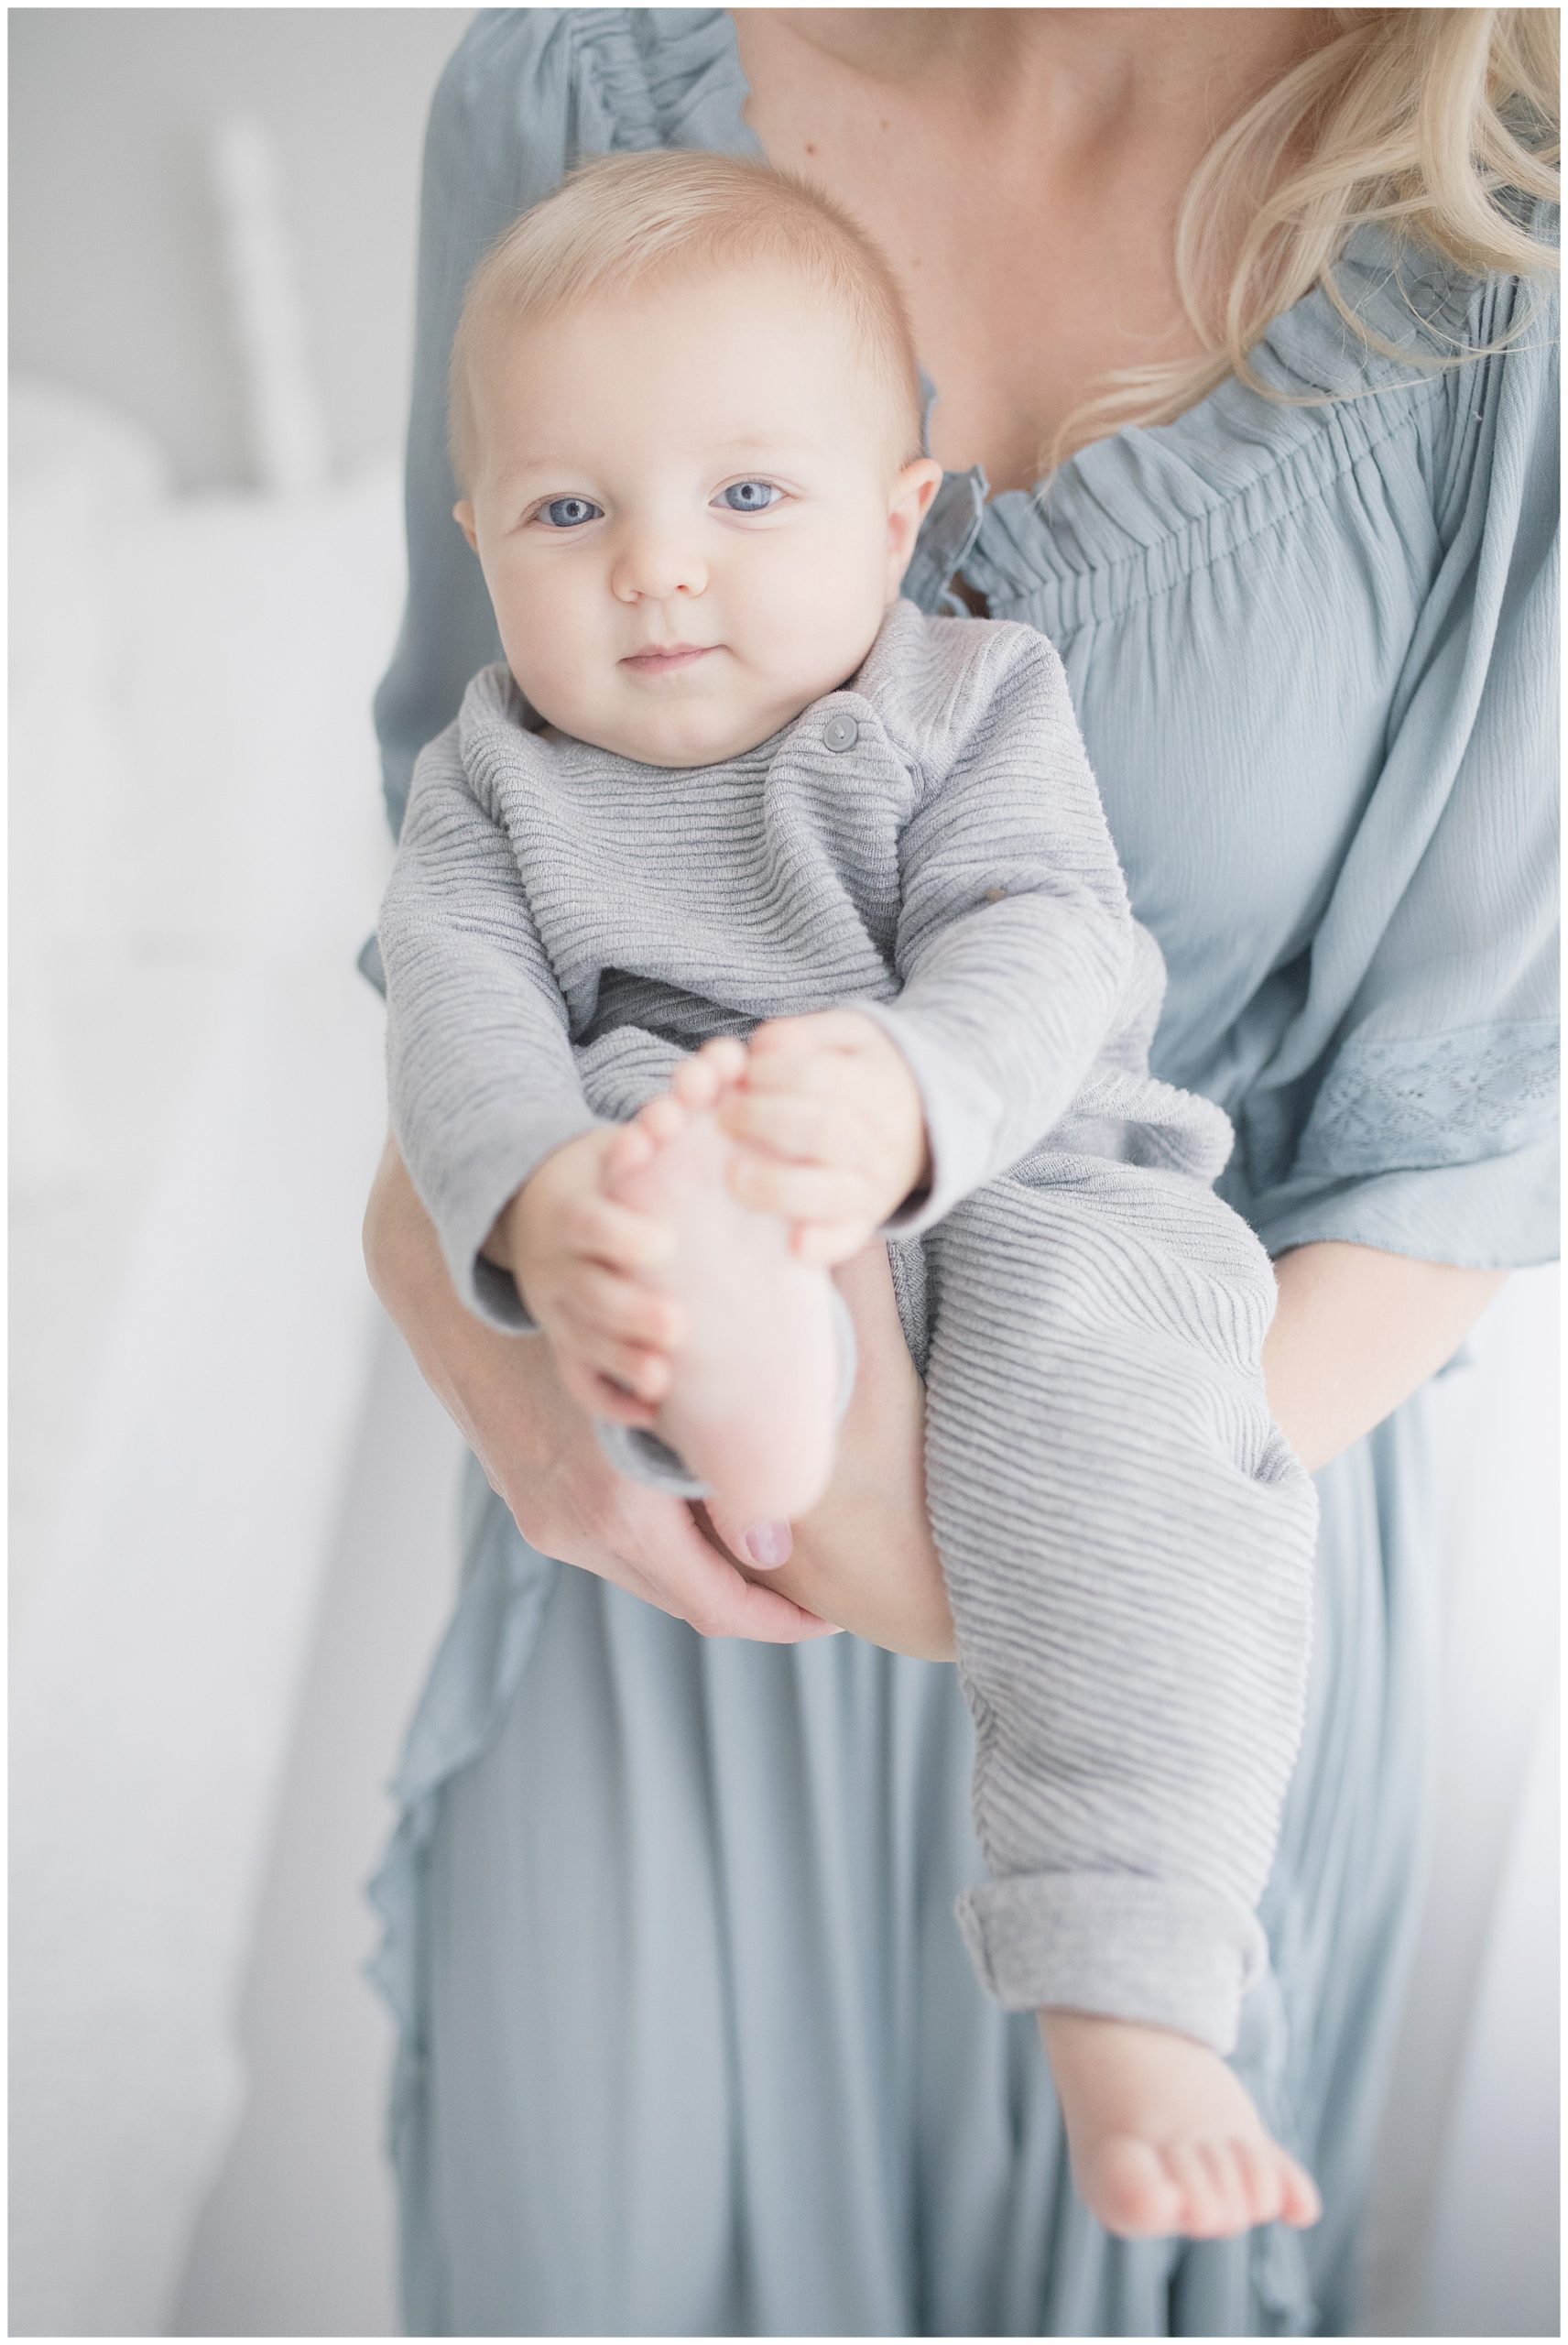 Blue eyed boy held by his momma. Photo by Little Sunshine Photography.